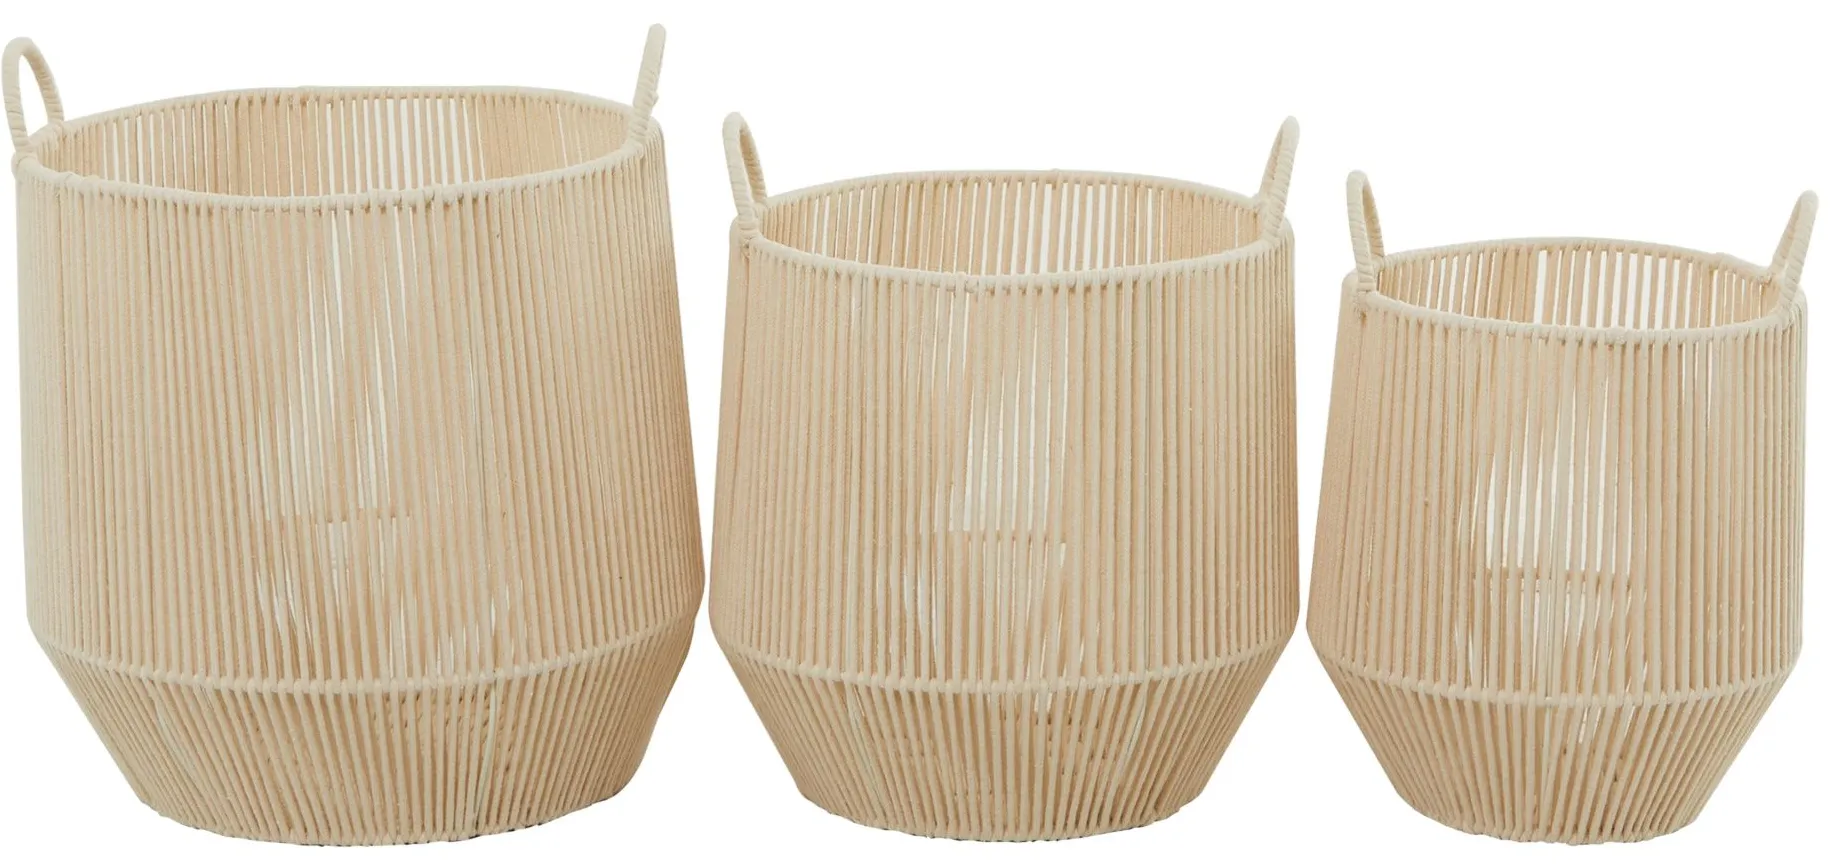 Ivy Collection Dooku Storage Baskets - Set of 3 in Brown by UMA Enterprises